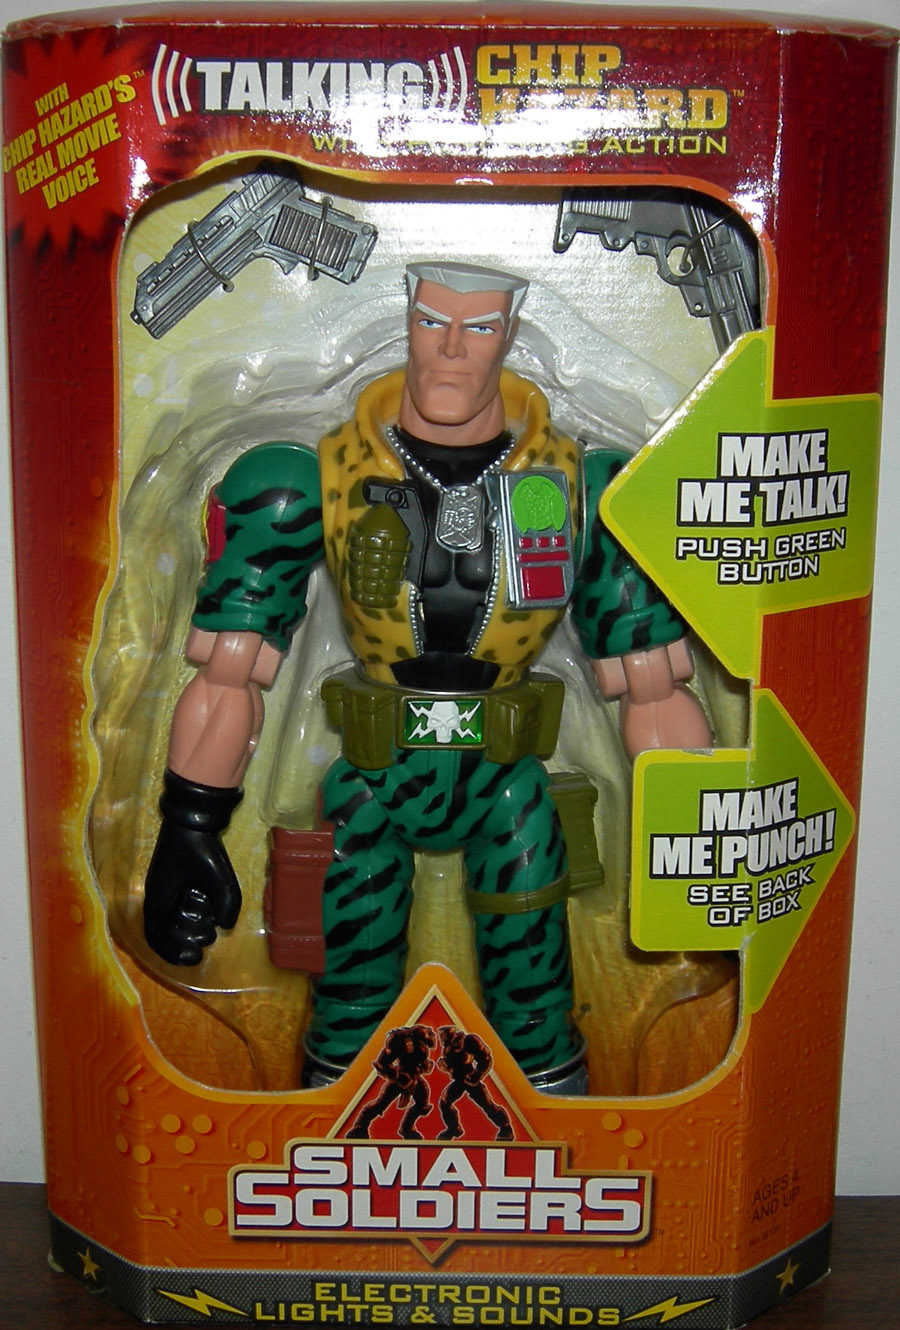 Small Soldiers Toys Replica